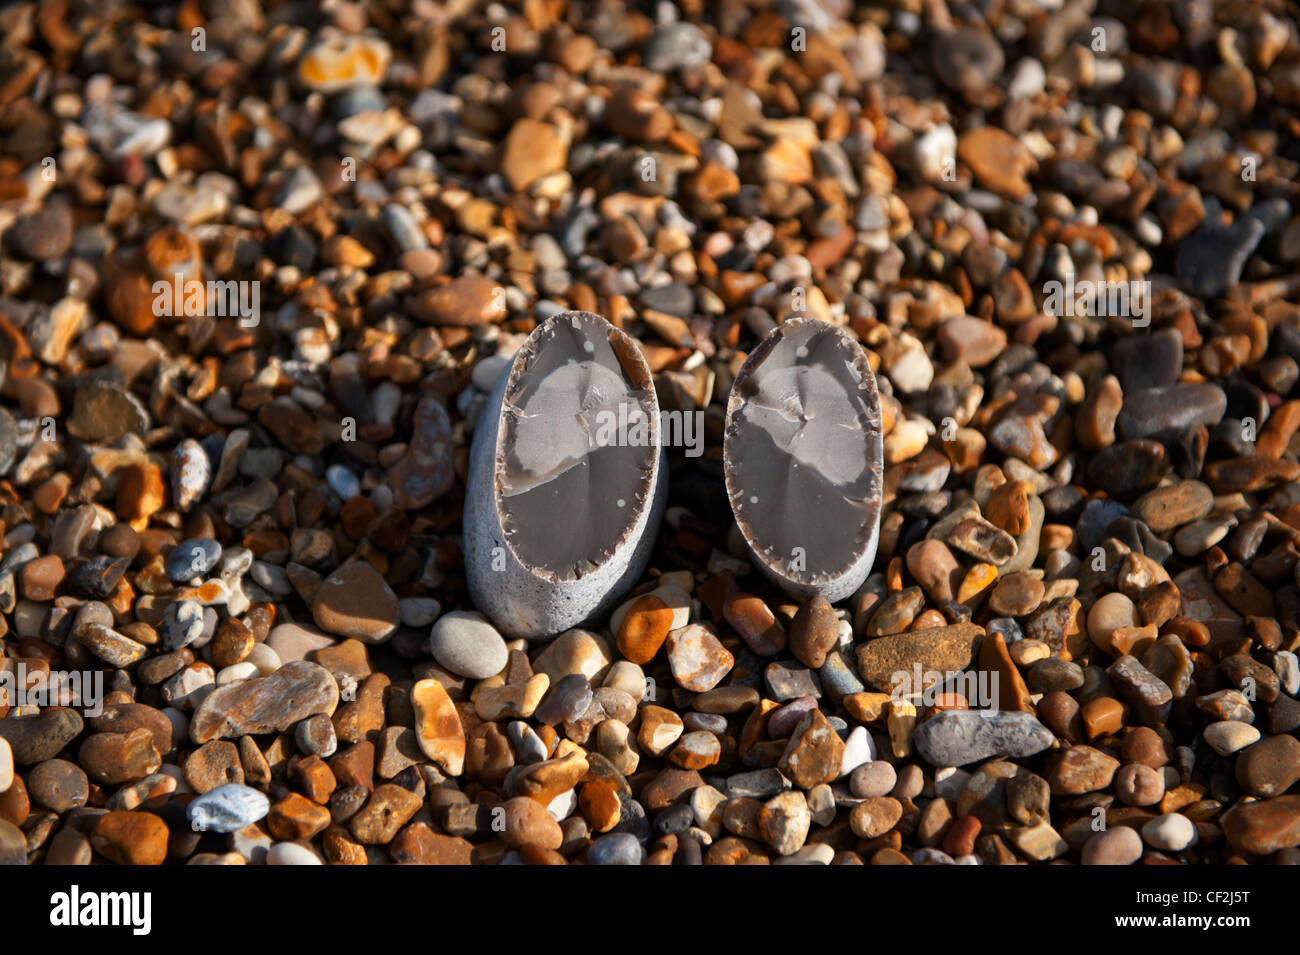 Flint Stone on the beach at Aldeburgh, the charming seaside town on the Suffolk coast of East Anglia, England 26 Feb 2012. Stock Photo